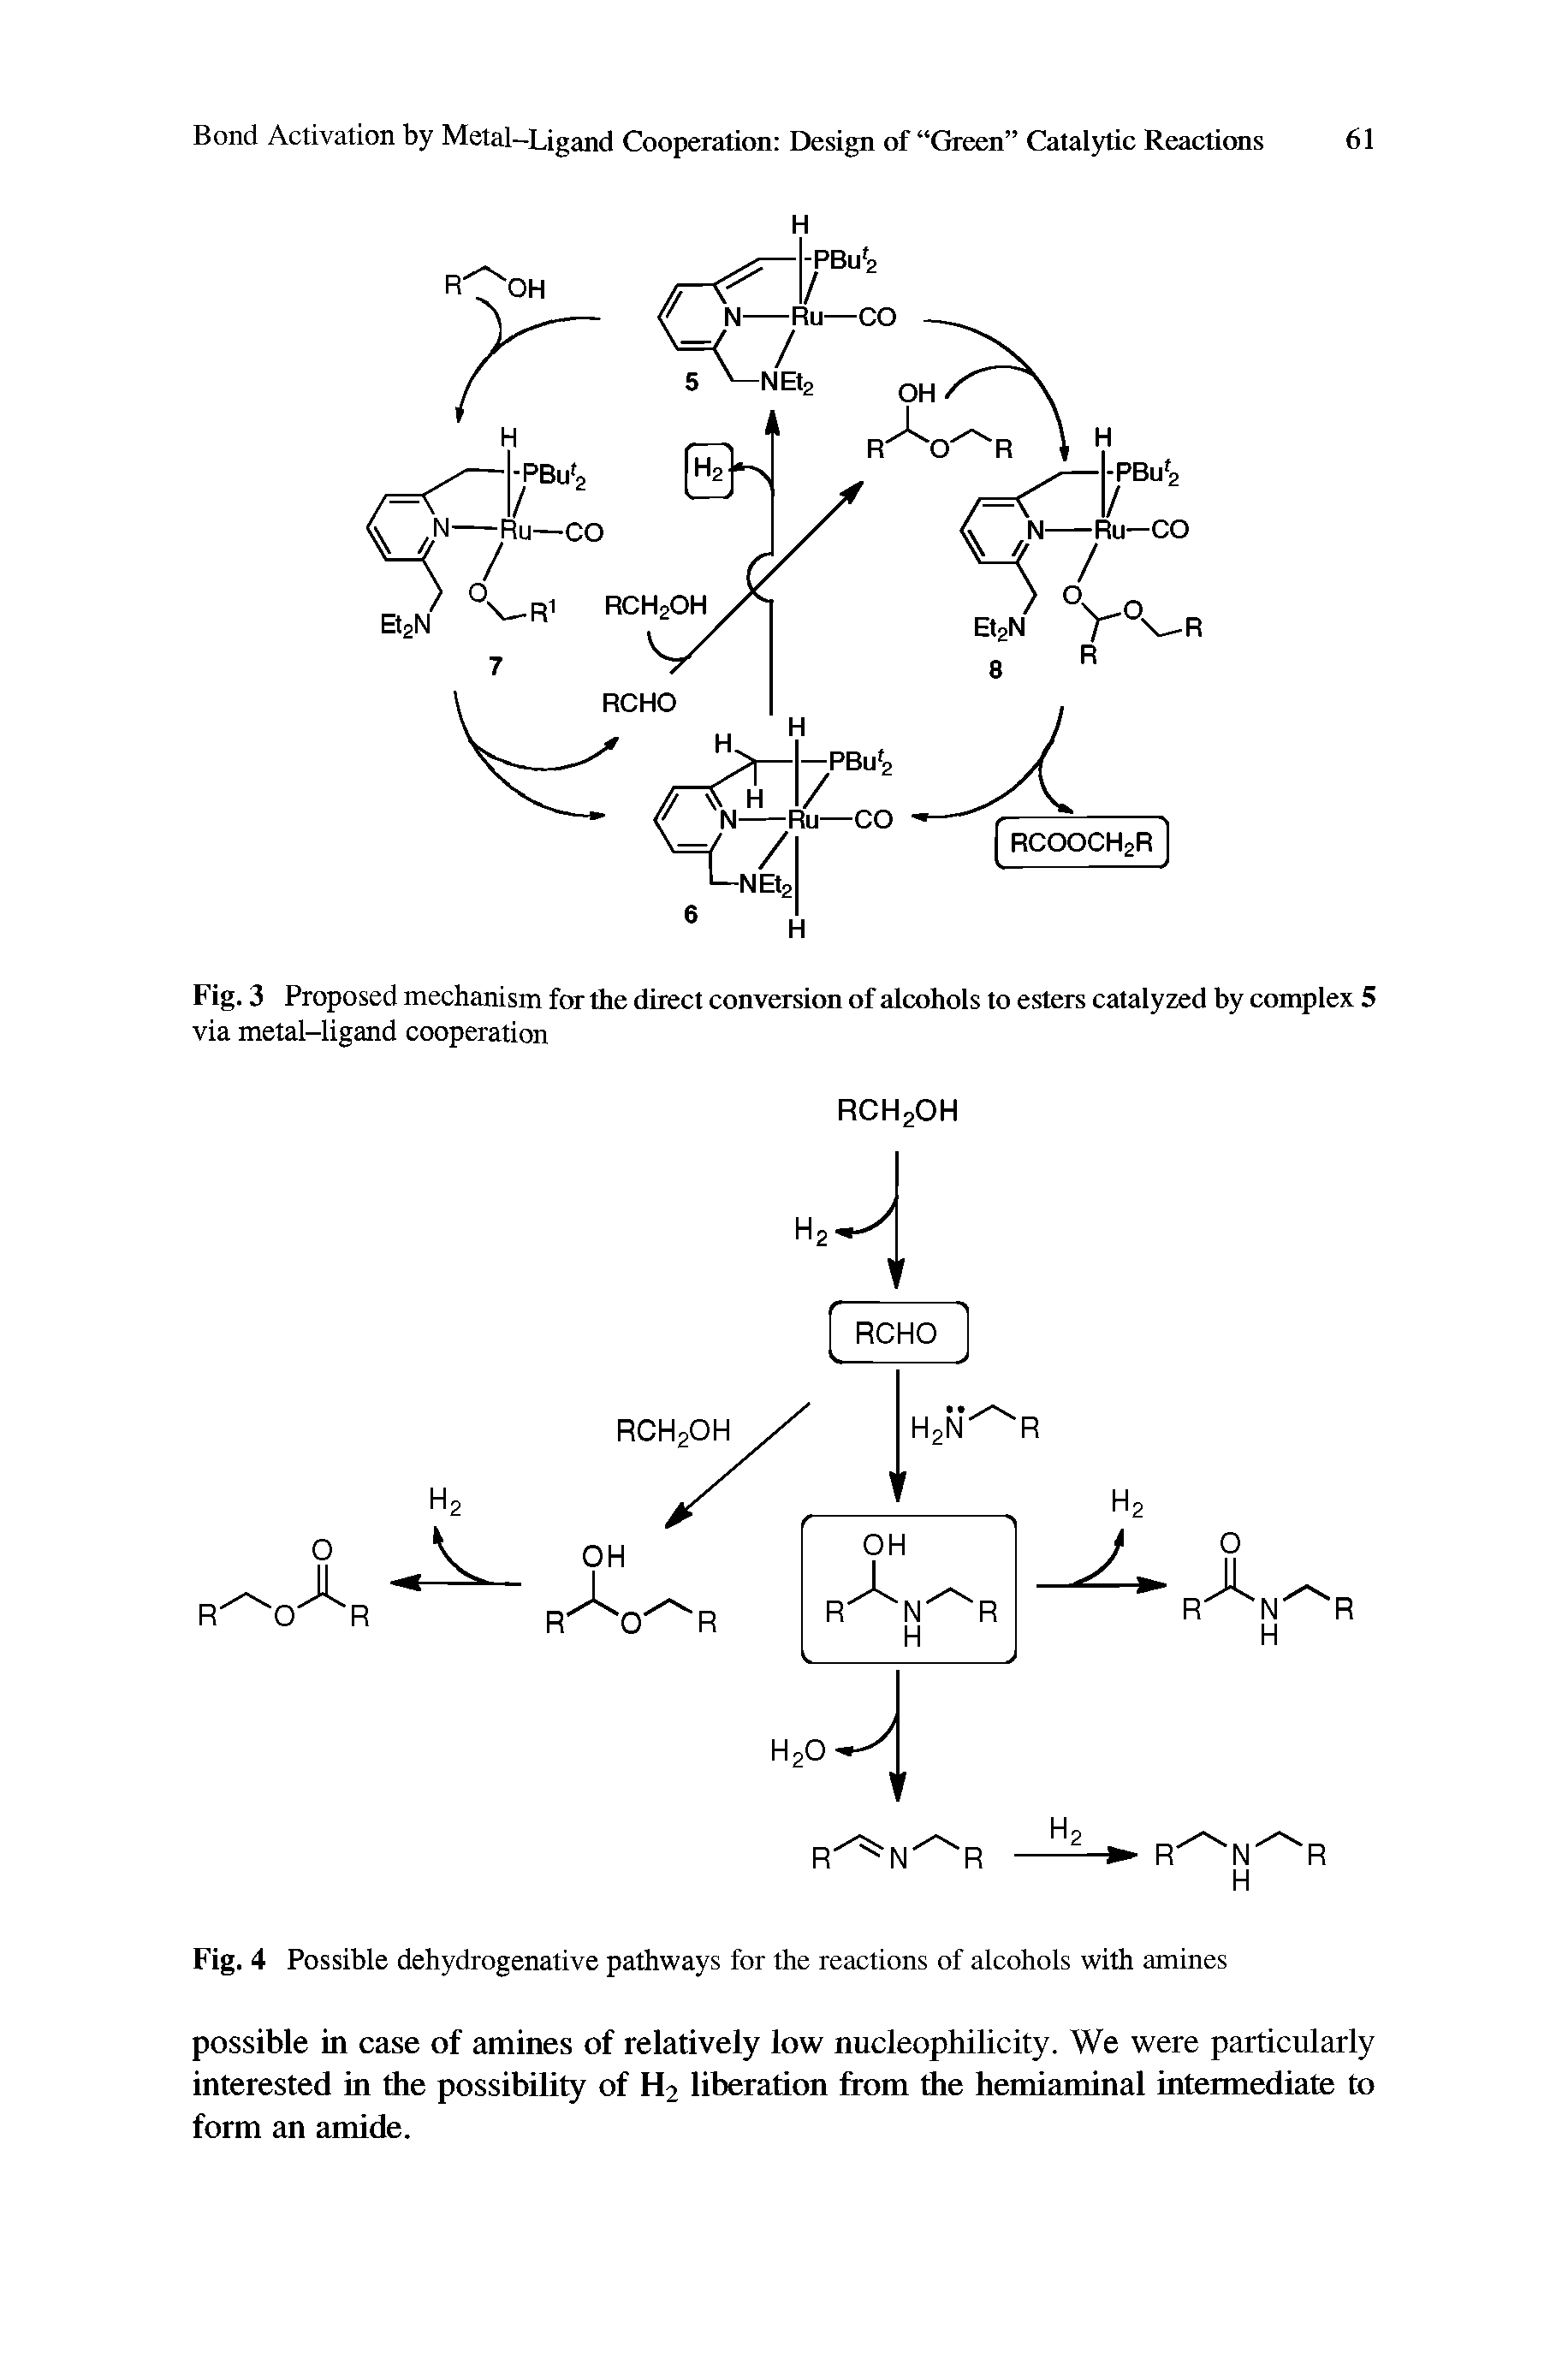 Fig. 3 Proposed mechanism for the direct conversion of alcohols to esters catalyzed by complex 5 via metal-ligand cooperation...